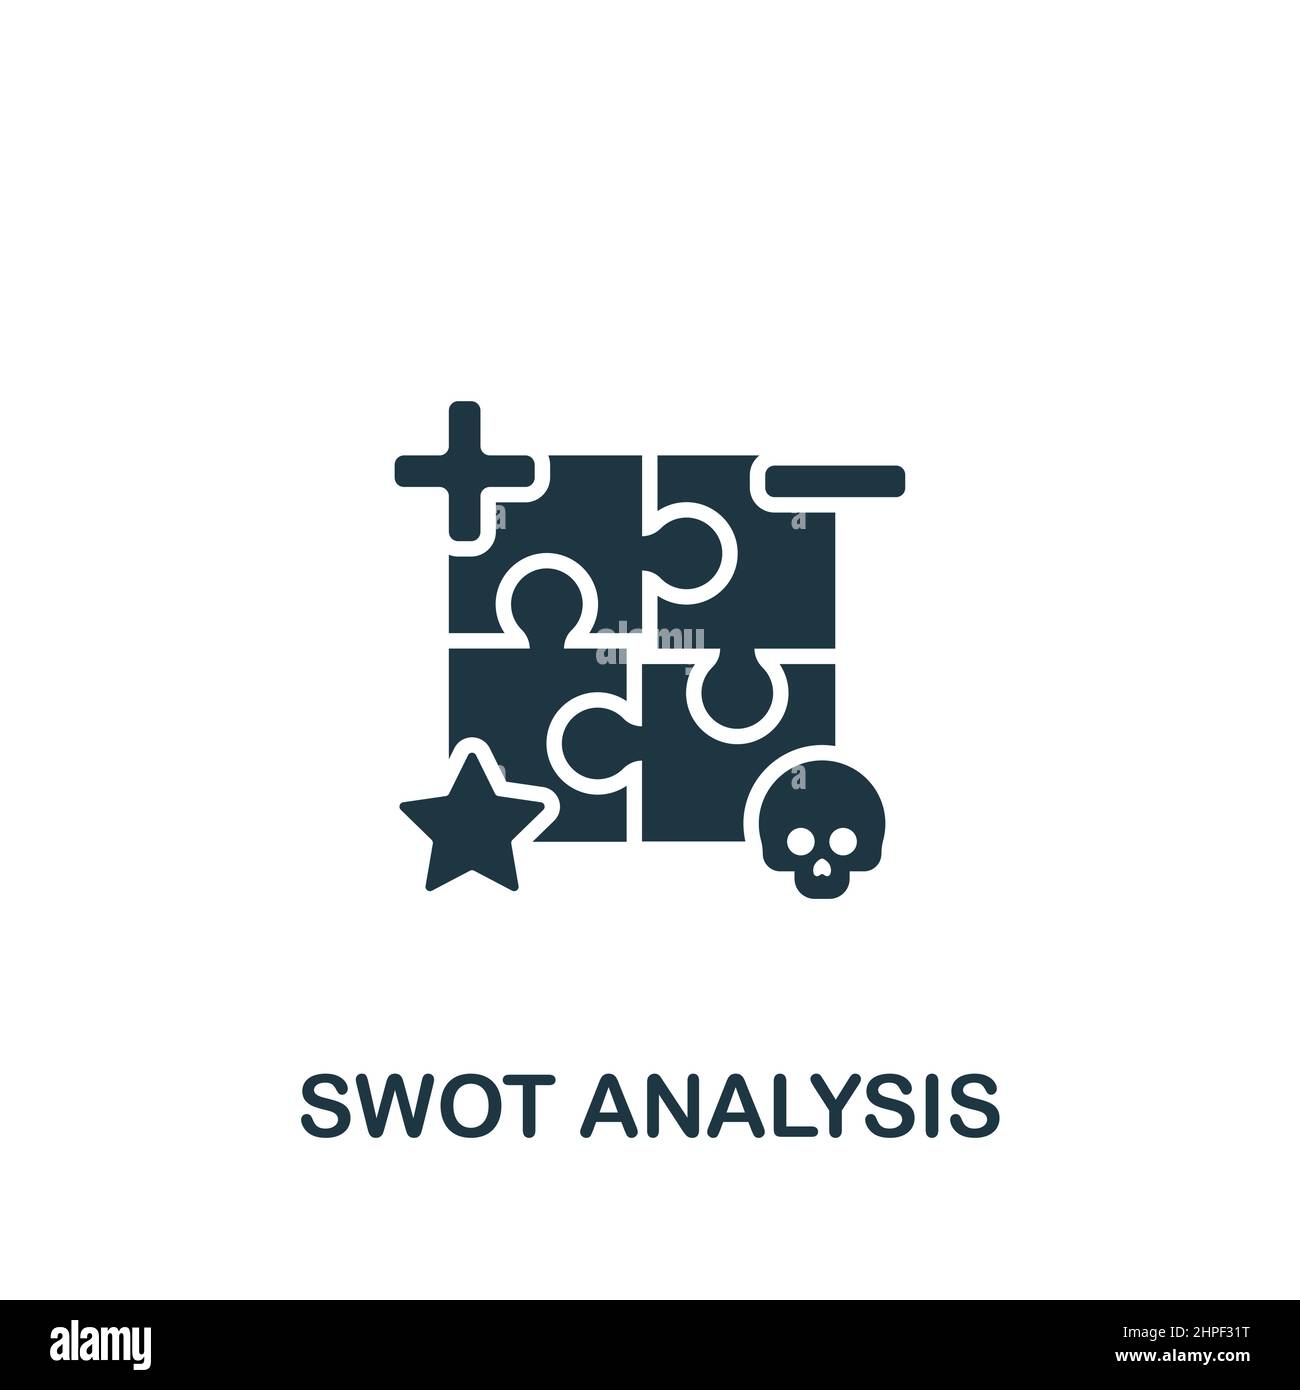 Swot Analysis icon. Monochrome simple icon for templates, web design and infographics Stock Vector